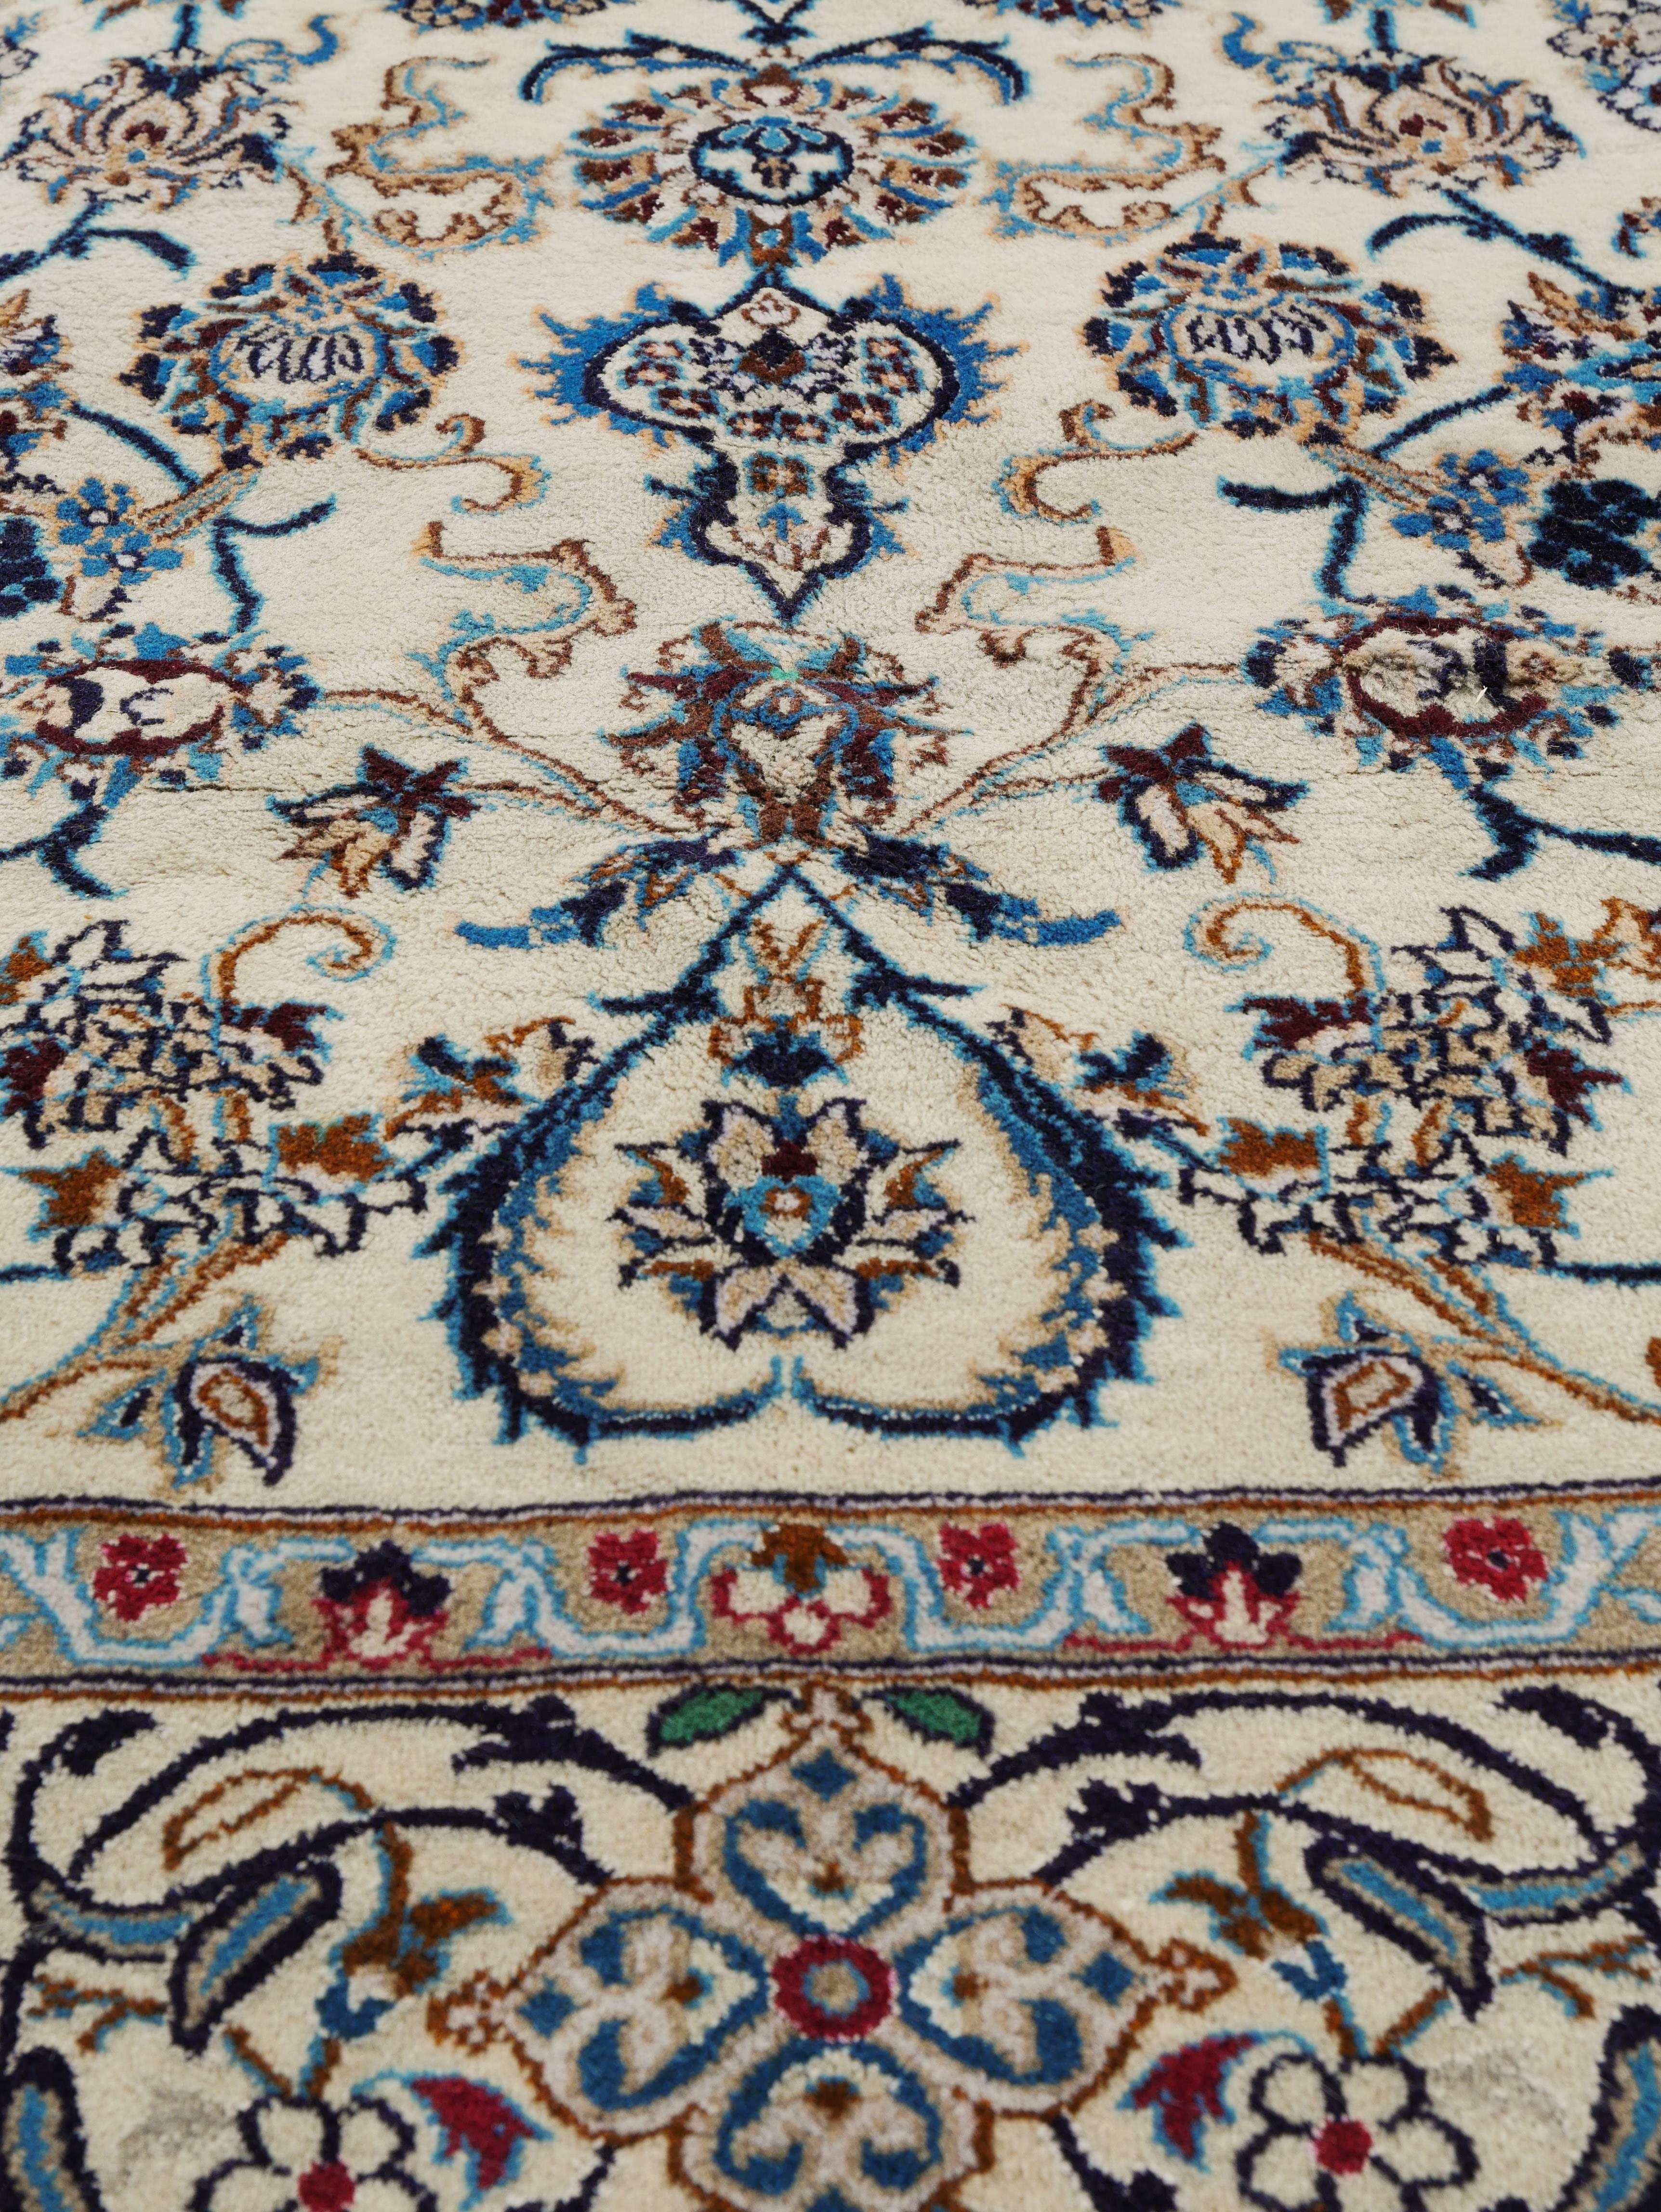 Persian Nain 290 x 190cm c. 9.5 by 6.2 feet For Sale 1